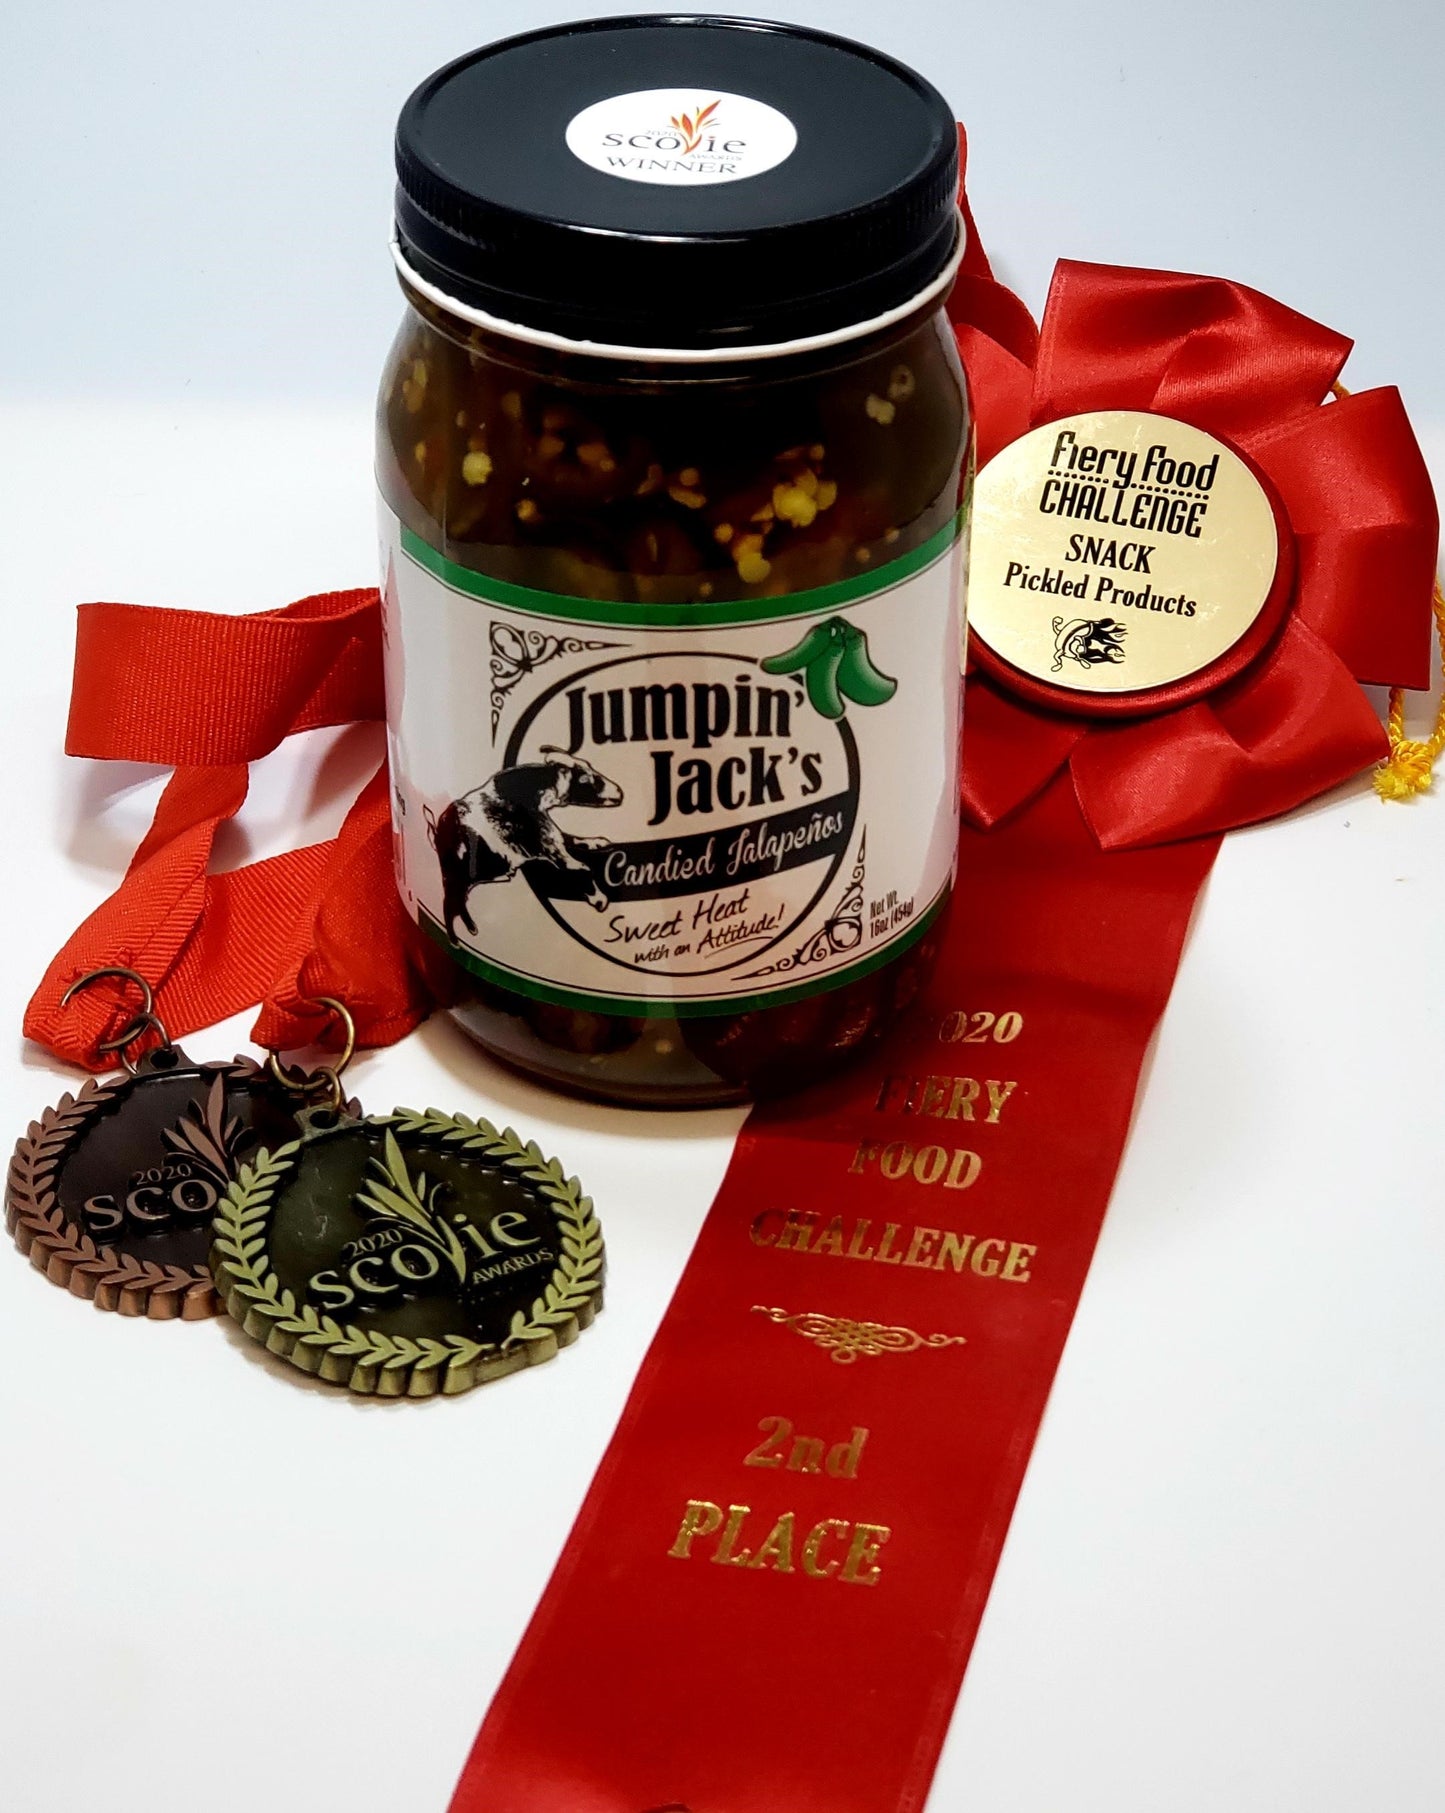 Jumpin' Jack's Candied Jalapenos